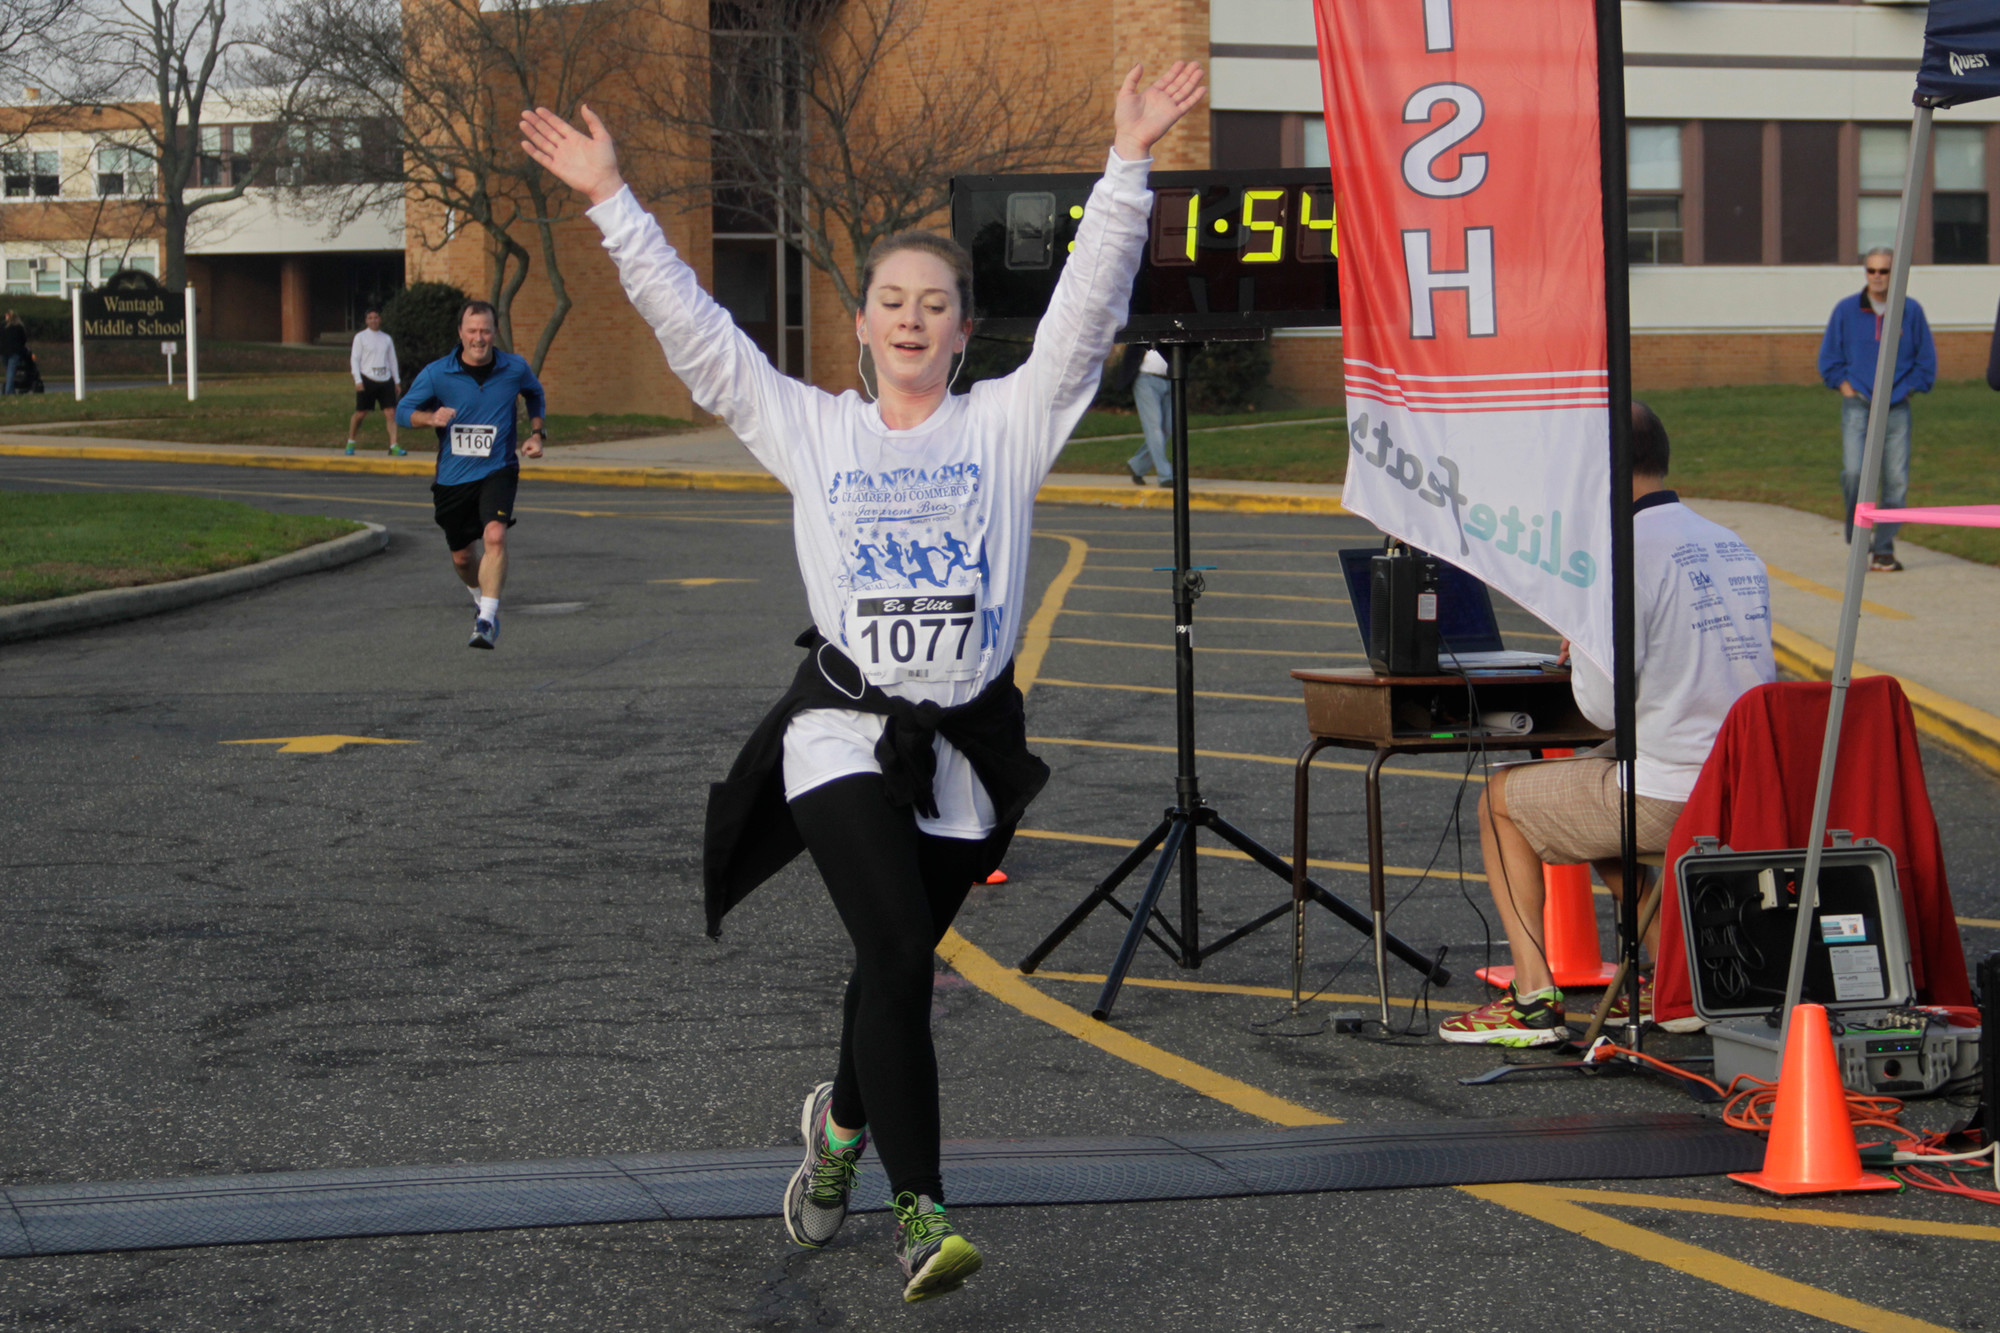 Lauren Consoli, of Wantagh, was a first-time participant in the Snowball Run, which was an annual event in Wantagh until 2012, and returned this year.